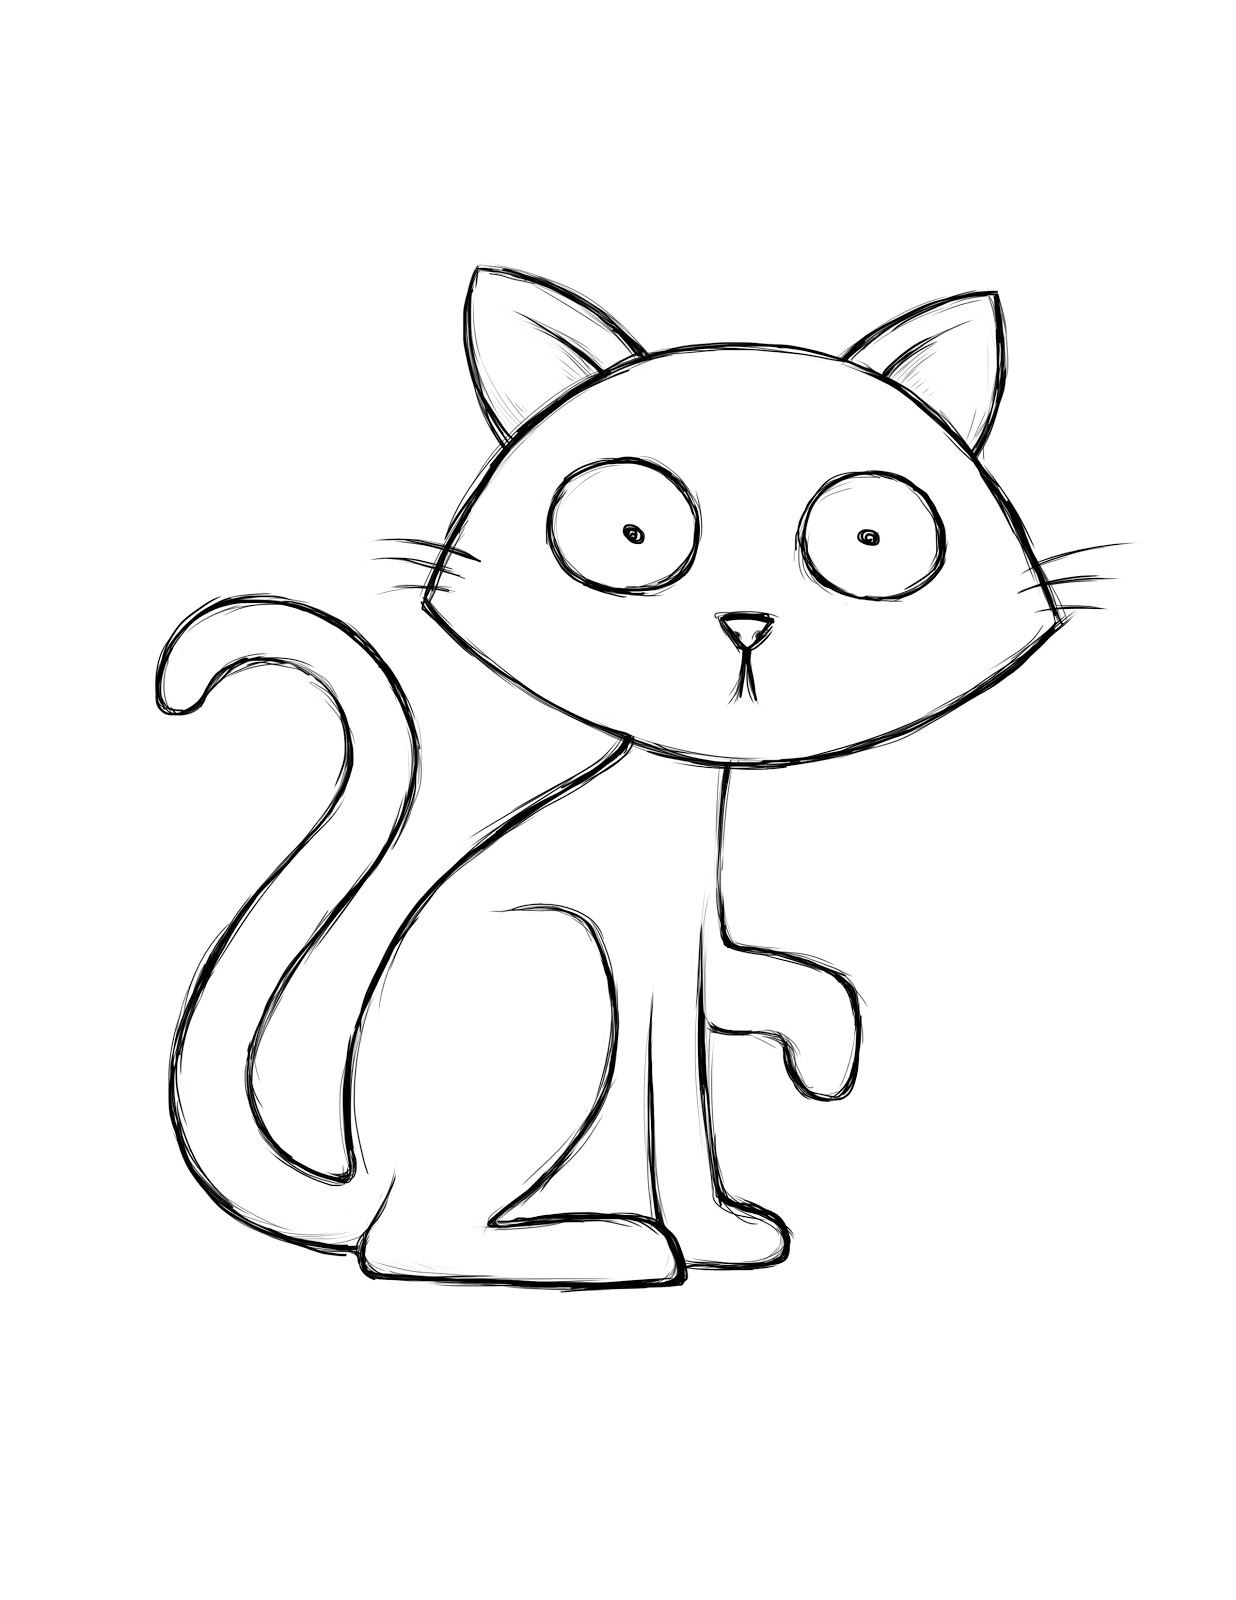 coloring pictures of cats top 30 free printable cat coloring pages for kids coloring cats pictures of 